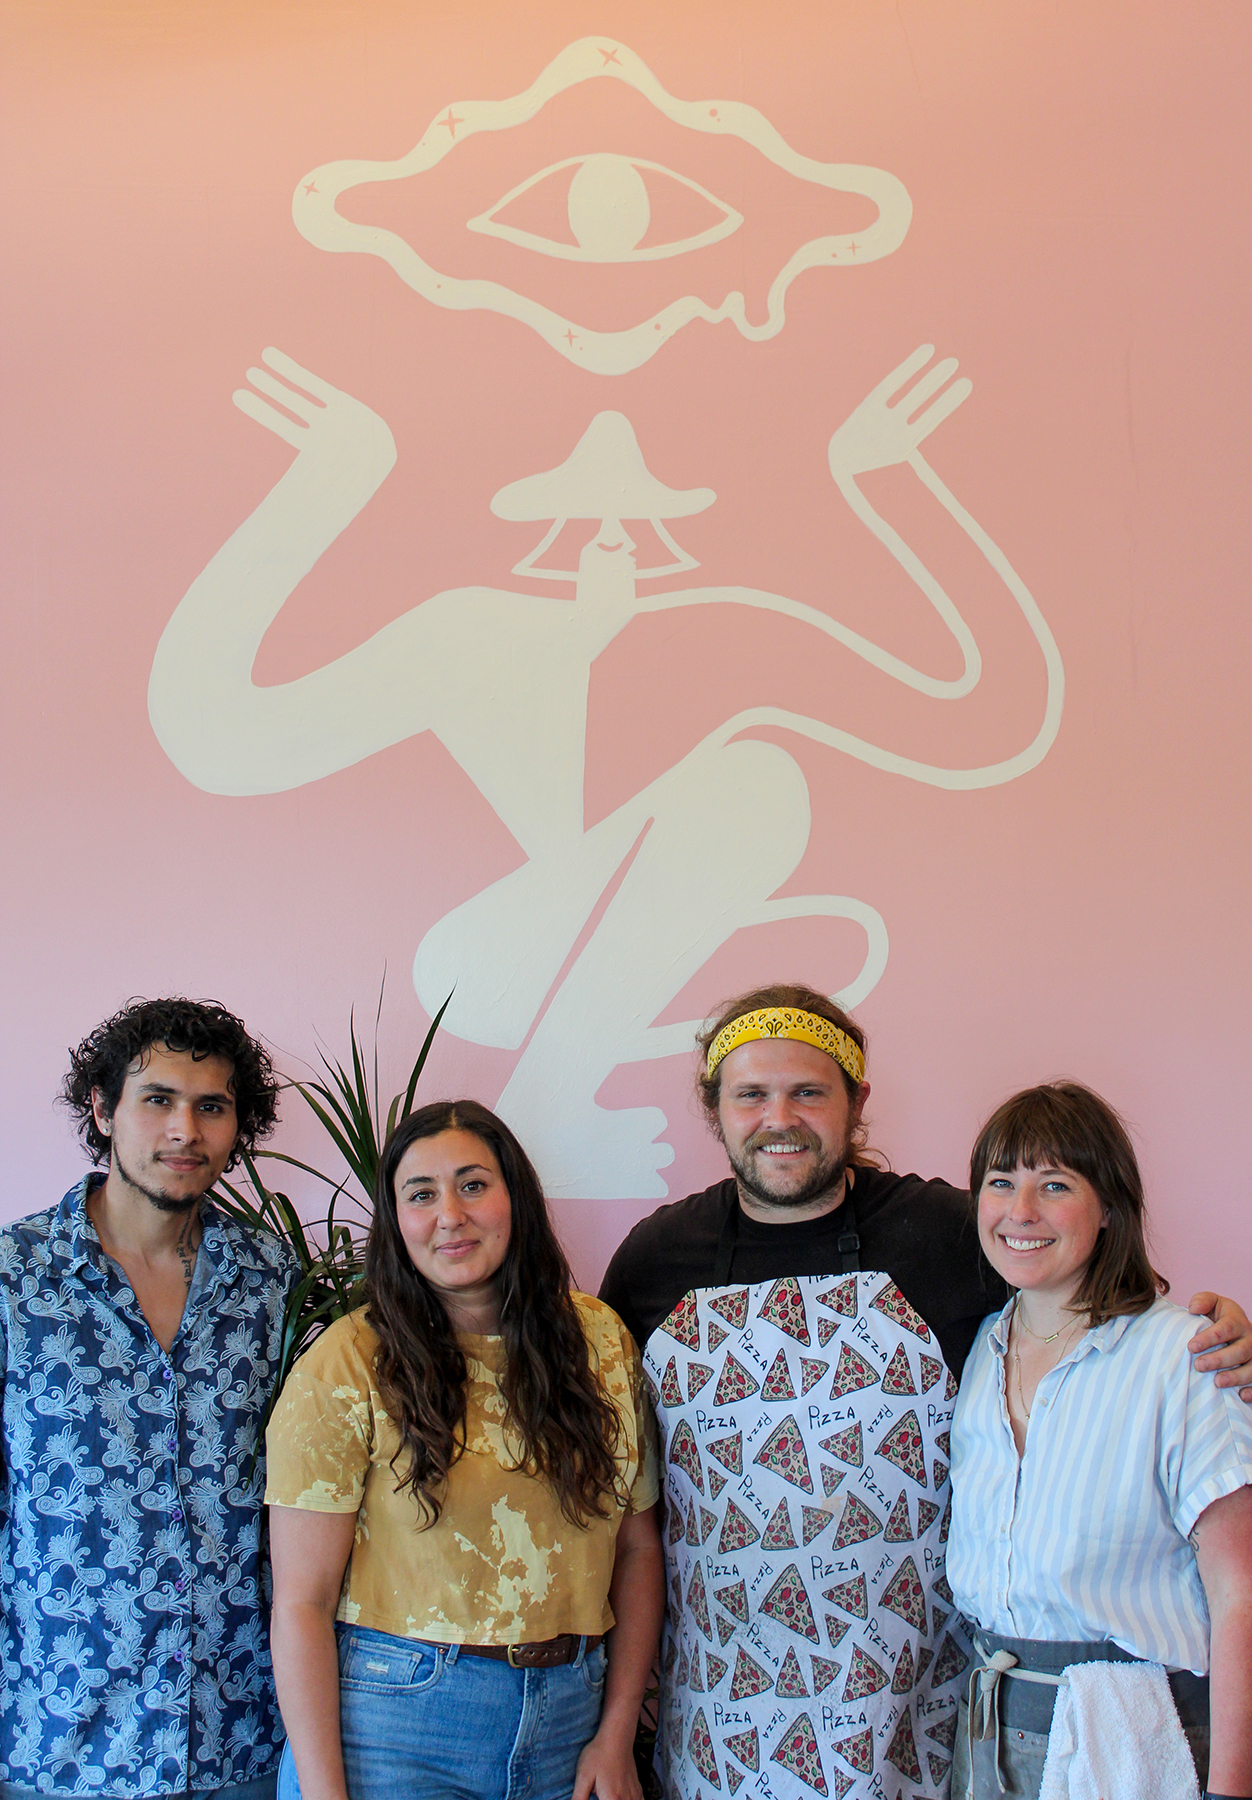 Right to left, Psychic Pie owners Leith Leiser-Miller and Nicholi Ludlow, with staff members Analise Lofaro and Angel Vasquez Perea at Psychic Pie in Sebastopol. (Nancy Peach)